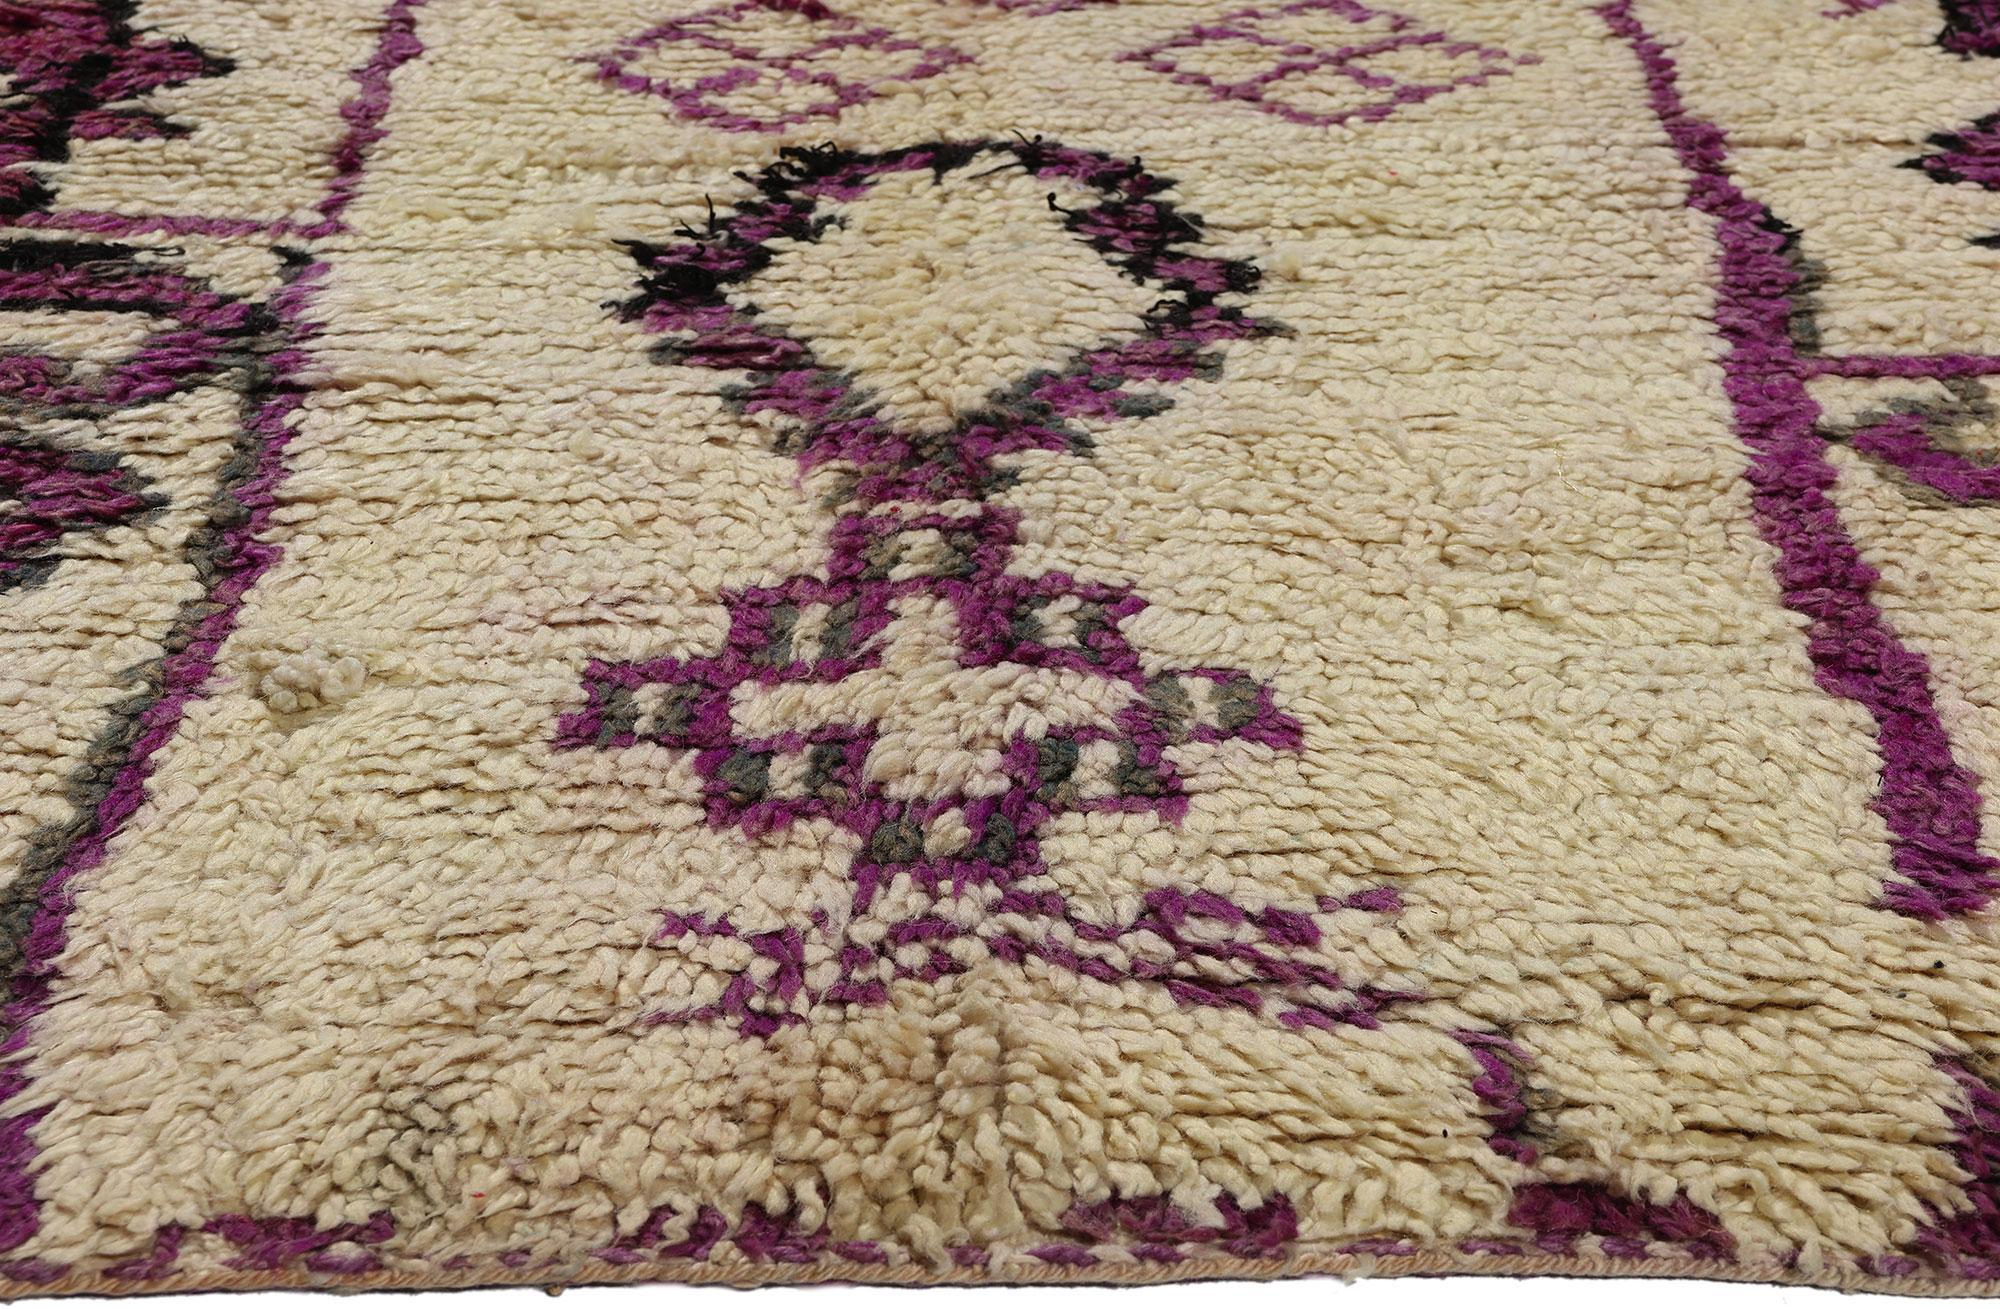 Vintage Berber Moroccan Azilal Rug, Boho Chic Meets Cozy Tribal Enchantment In Good Condition For Sale In Dallas, TX